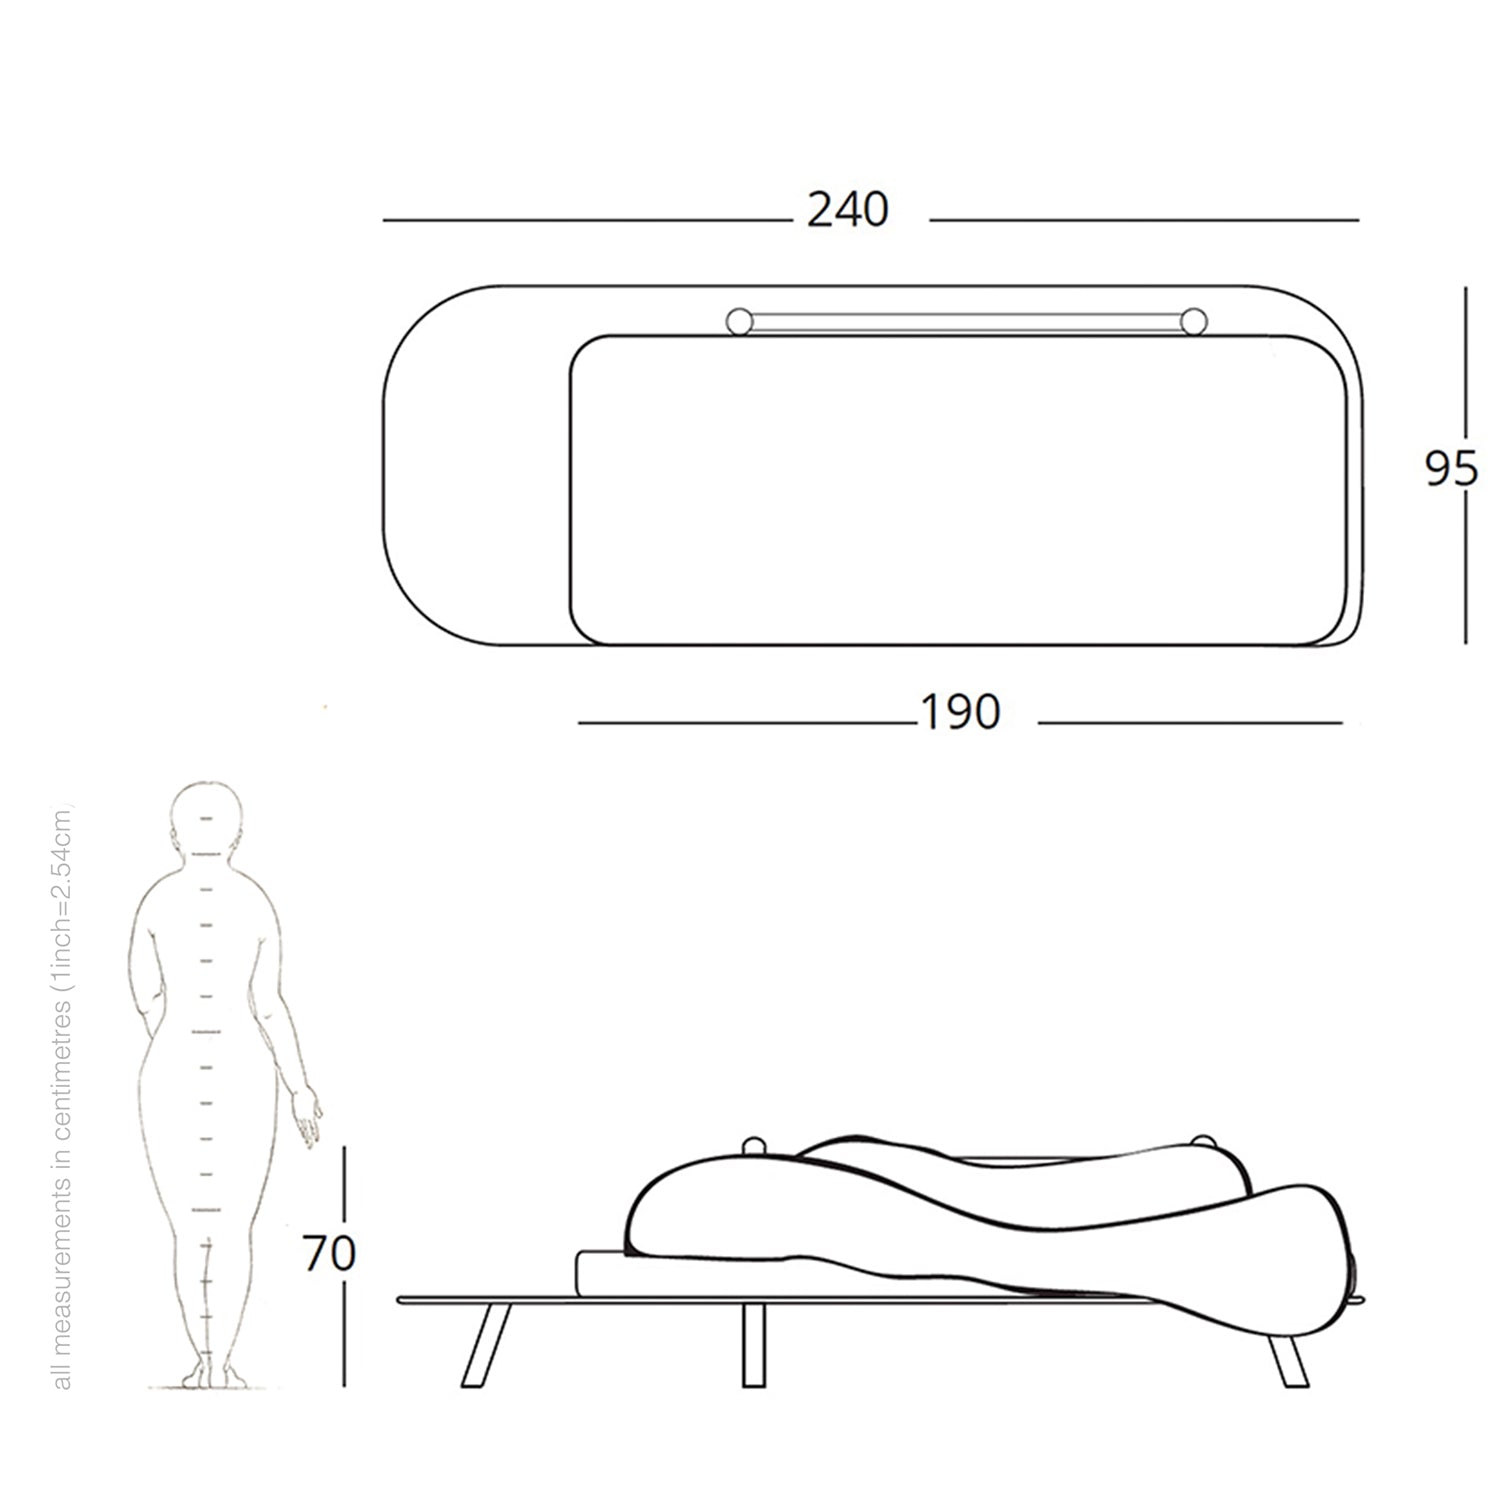 sofa with built in table drawing and dimensions.